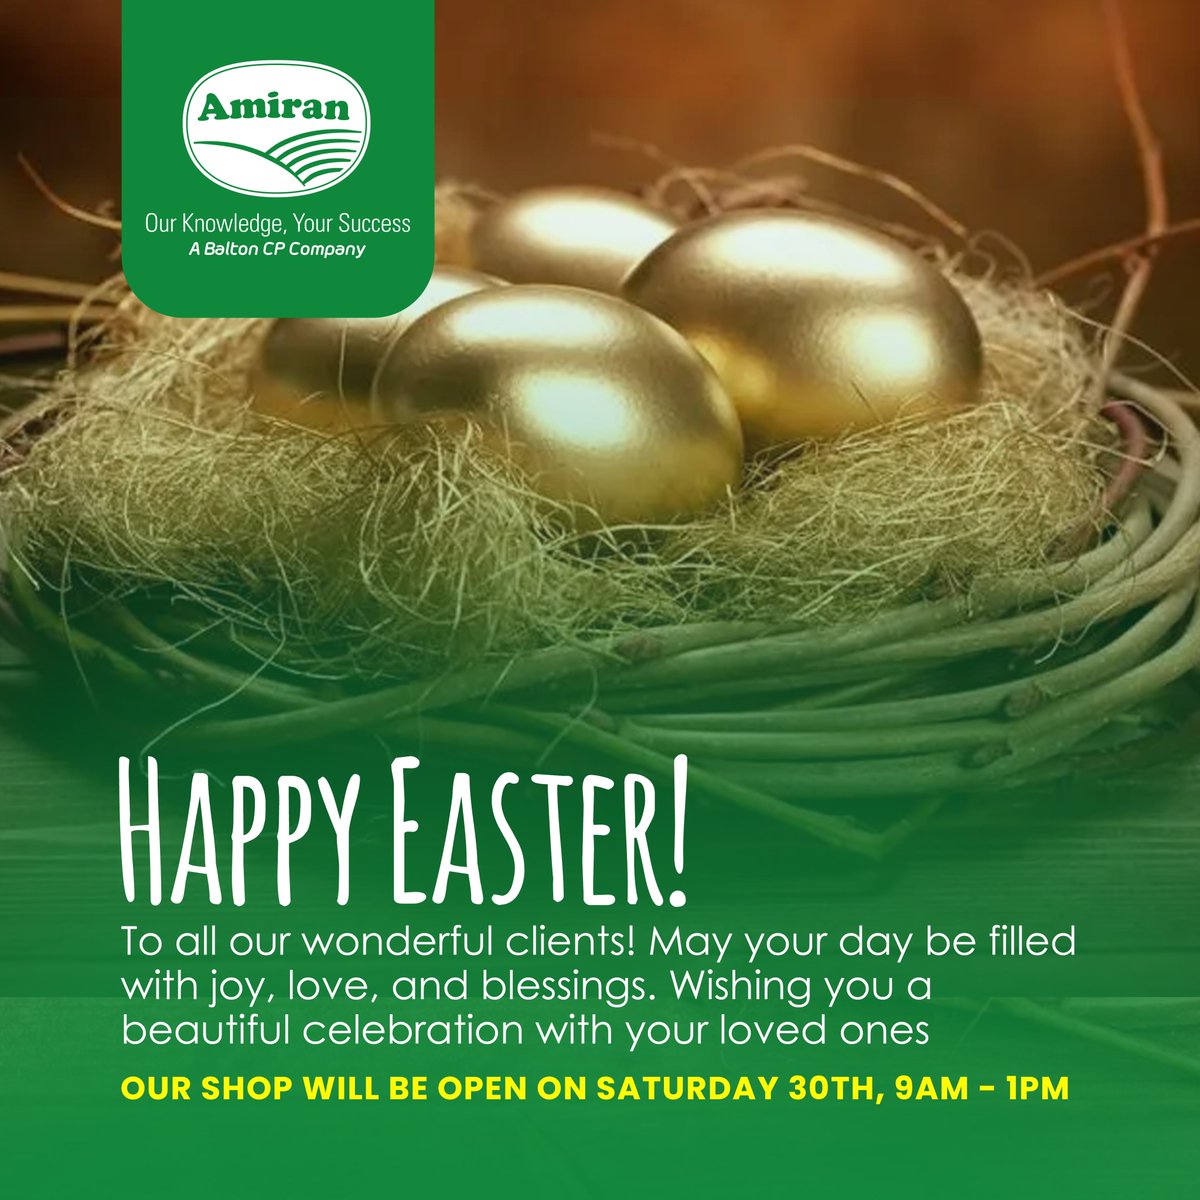 Wishing you a joyous and blessed Easter holiday from everyone here at Amiran.